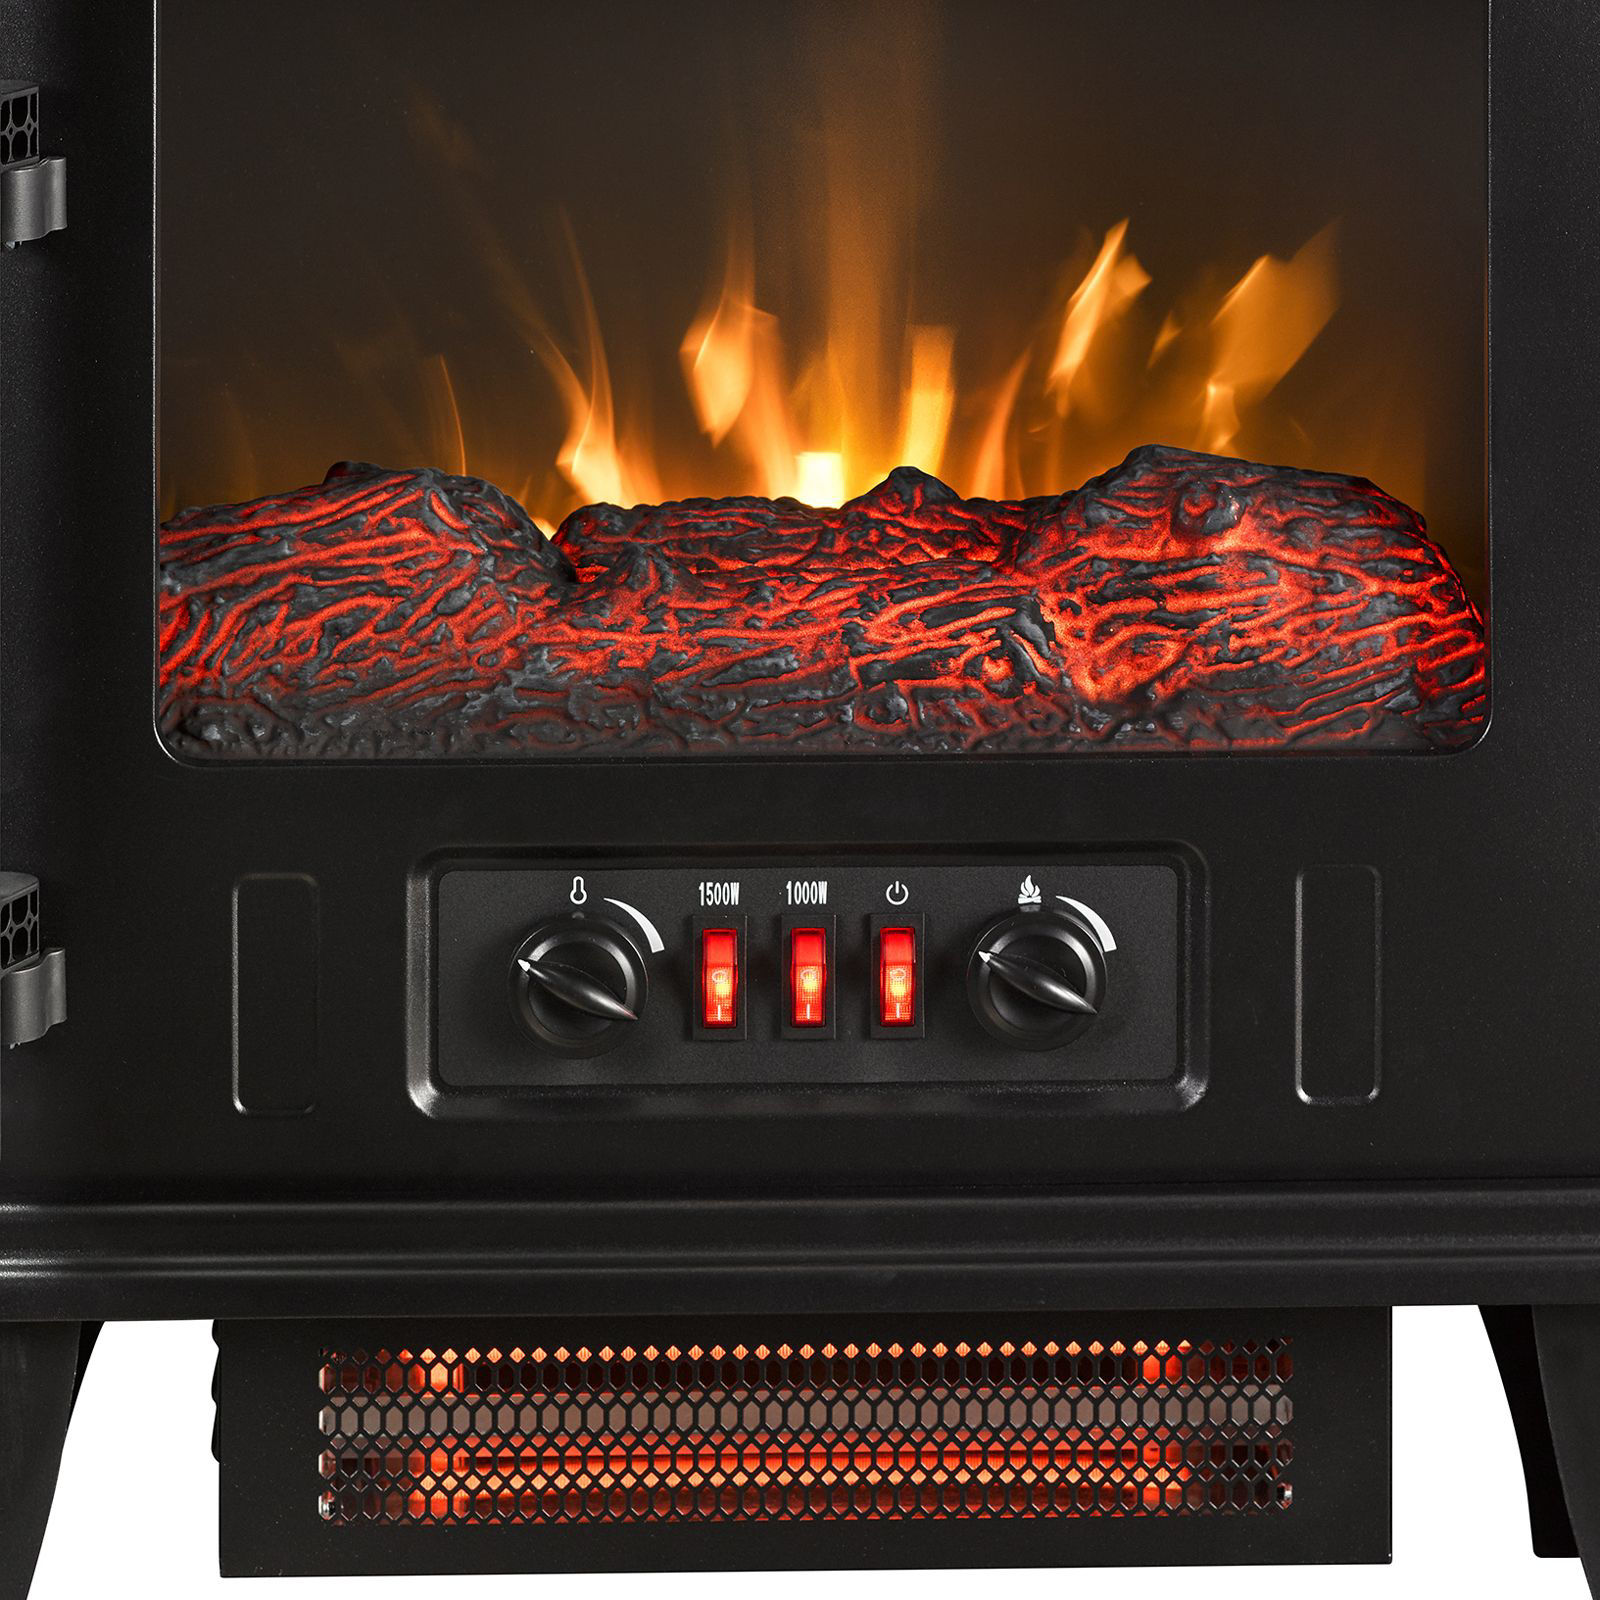 Duraflame Infrared Electric Stove